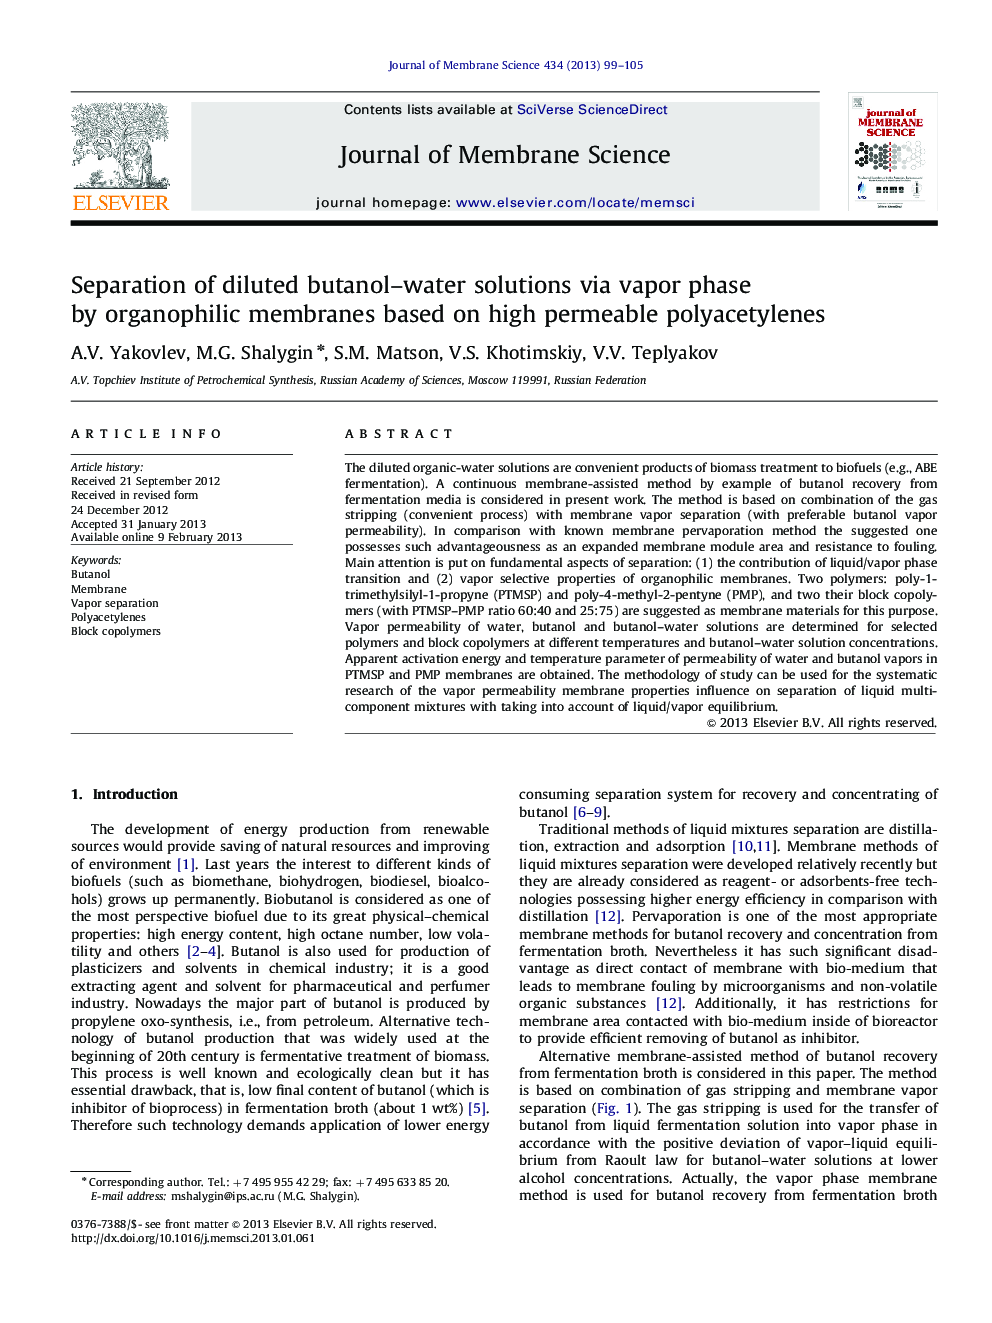 Separation of diluted butanol–water solutions via vapor phase by organophilic membranes based on high permeable polyacetylenes